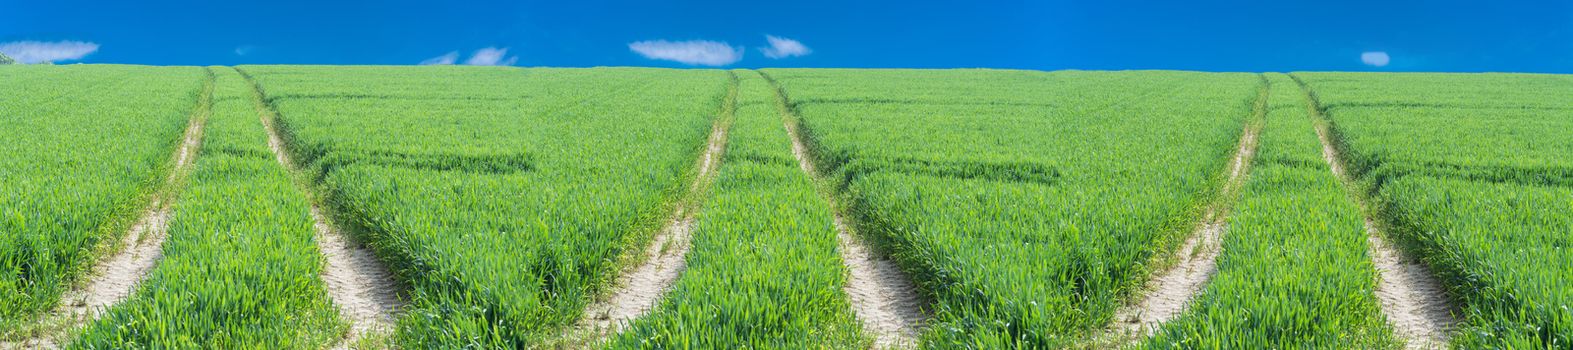 Three tractor tracks through a green agricultural field in spring, Scenics.